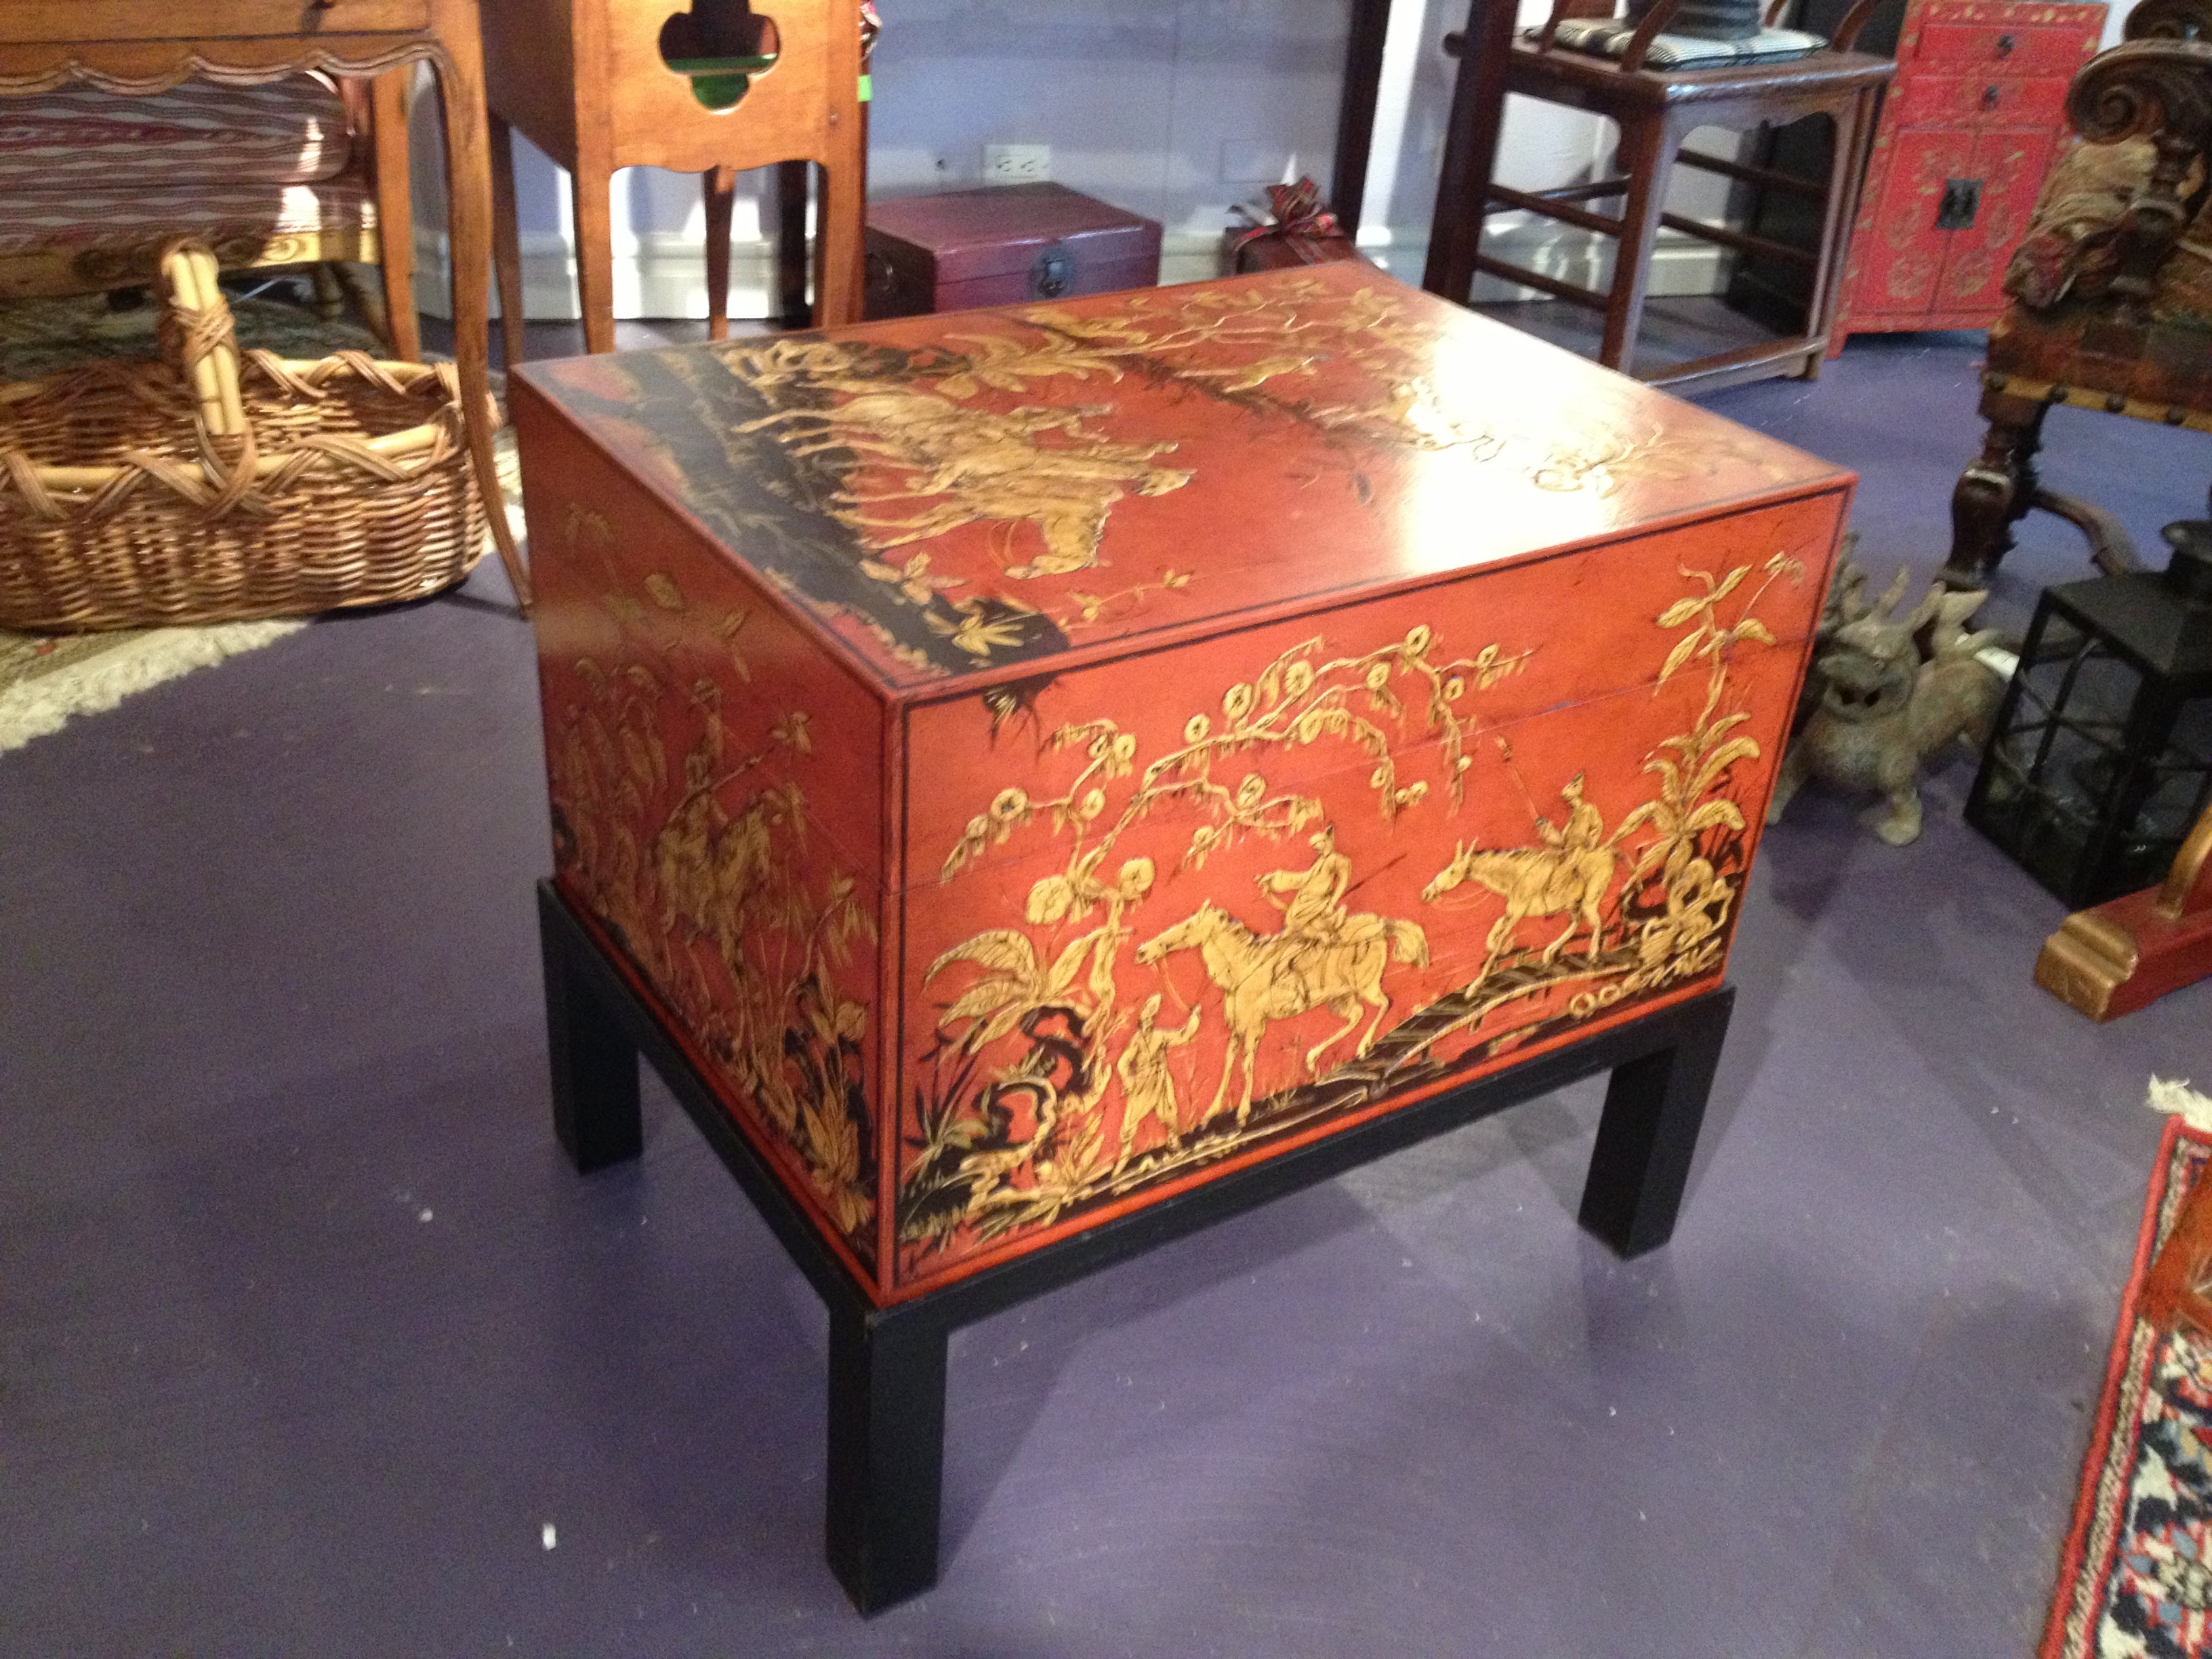 Chinese Red Lacquered Trunk with Stand